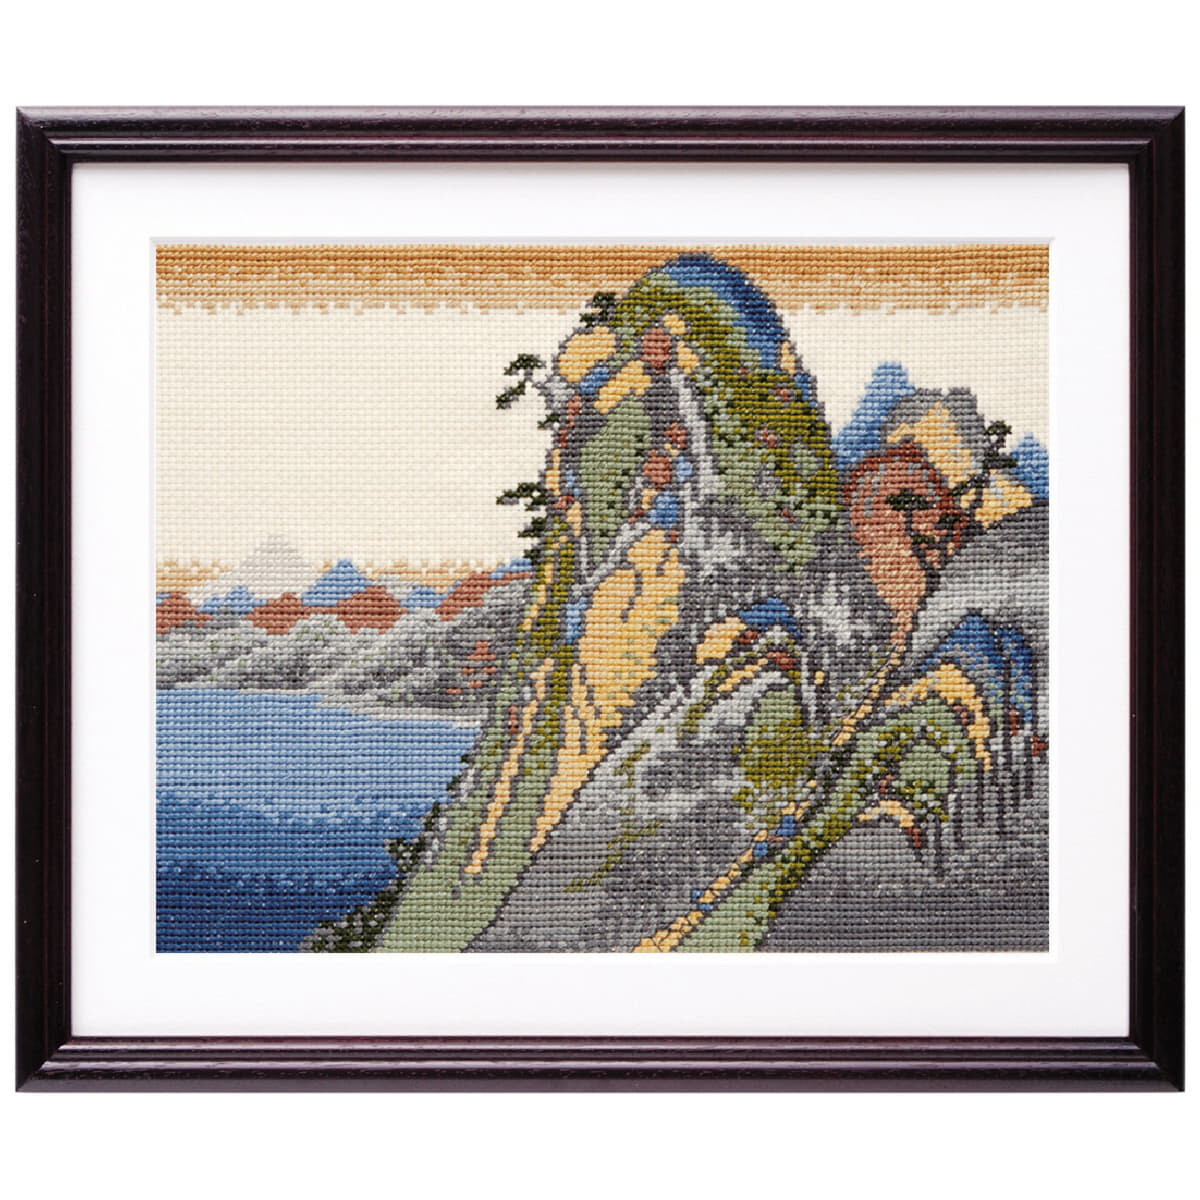 Olympus counted cross stitch kit "View Of The Lake...